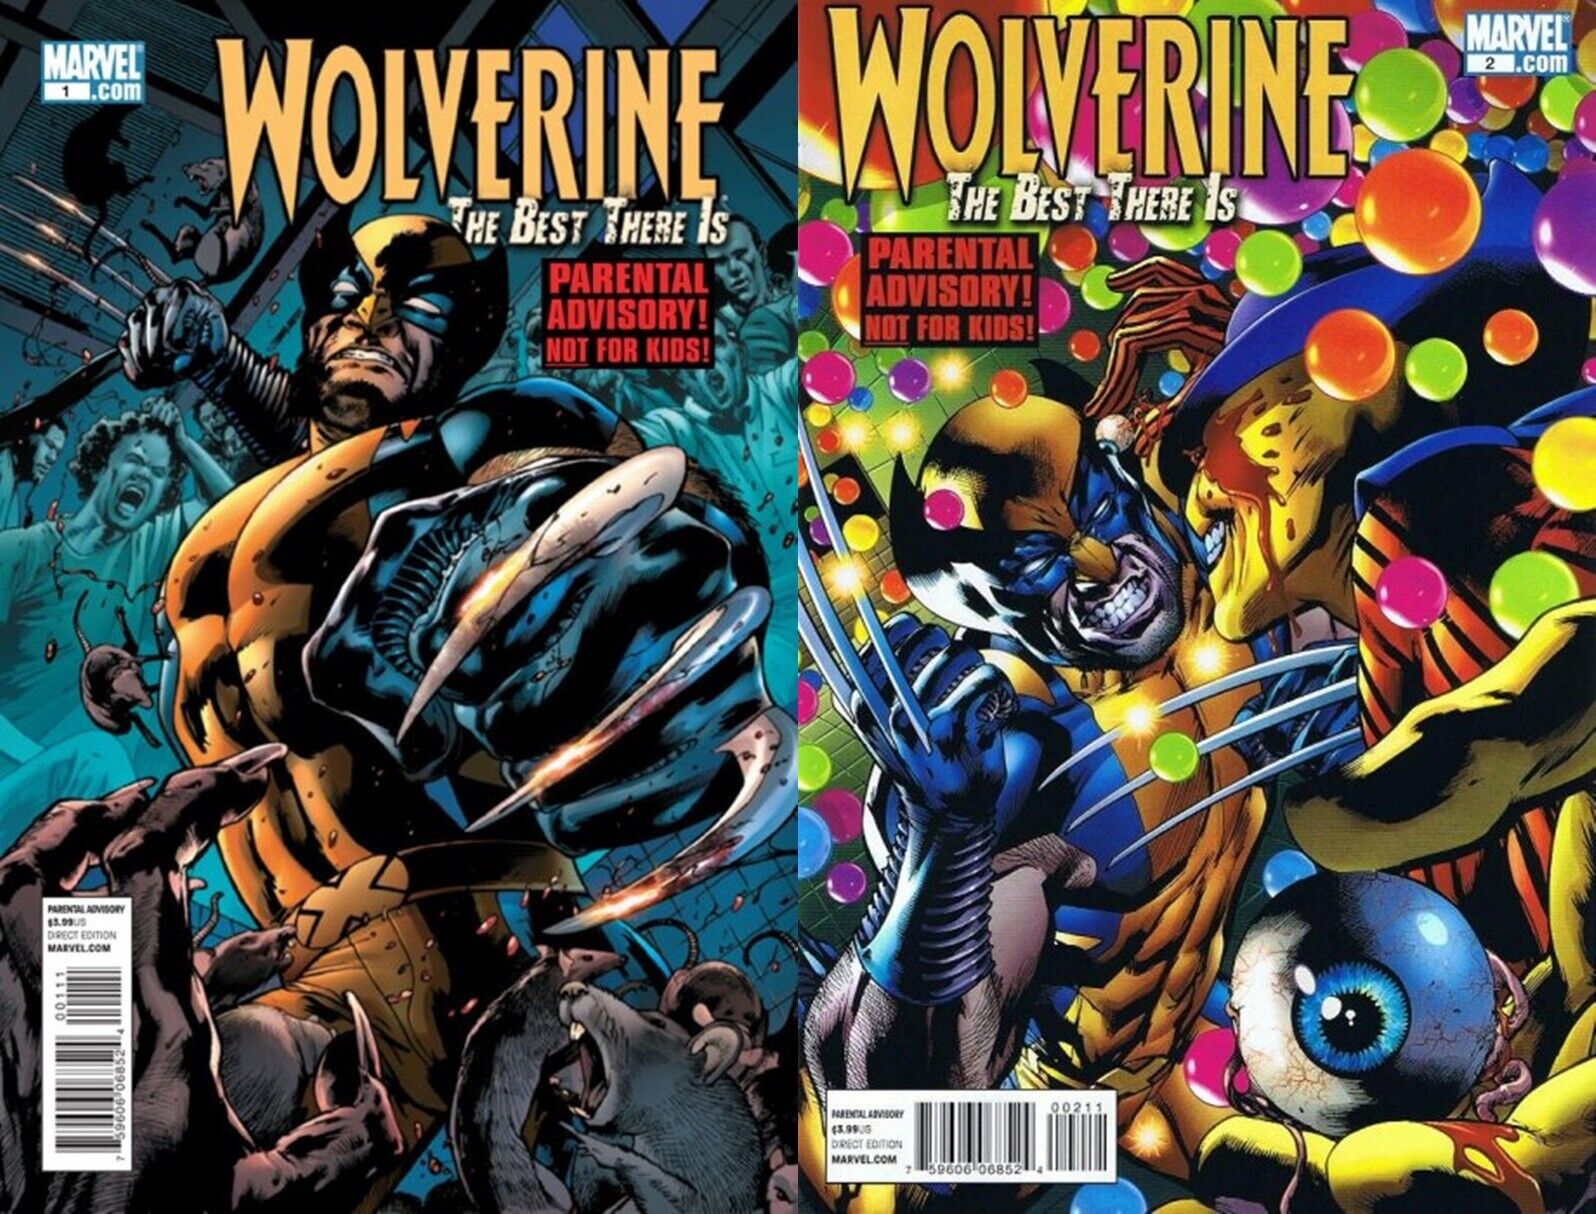 Wolverine: The Best There Is #1-2 (2011-2012) Marvel Comics - 2 Comics